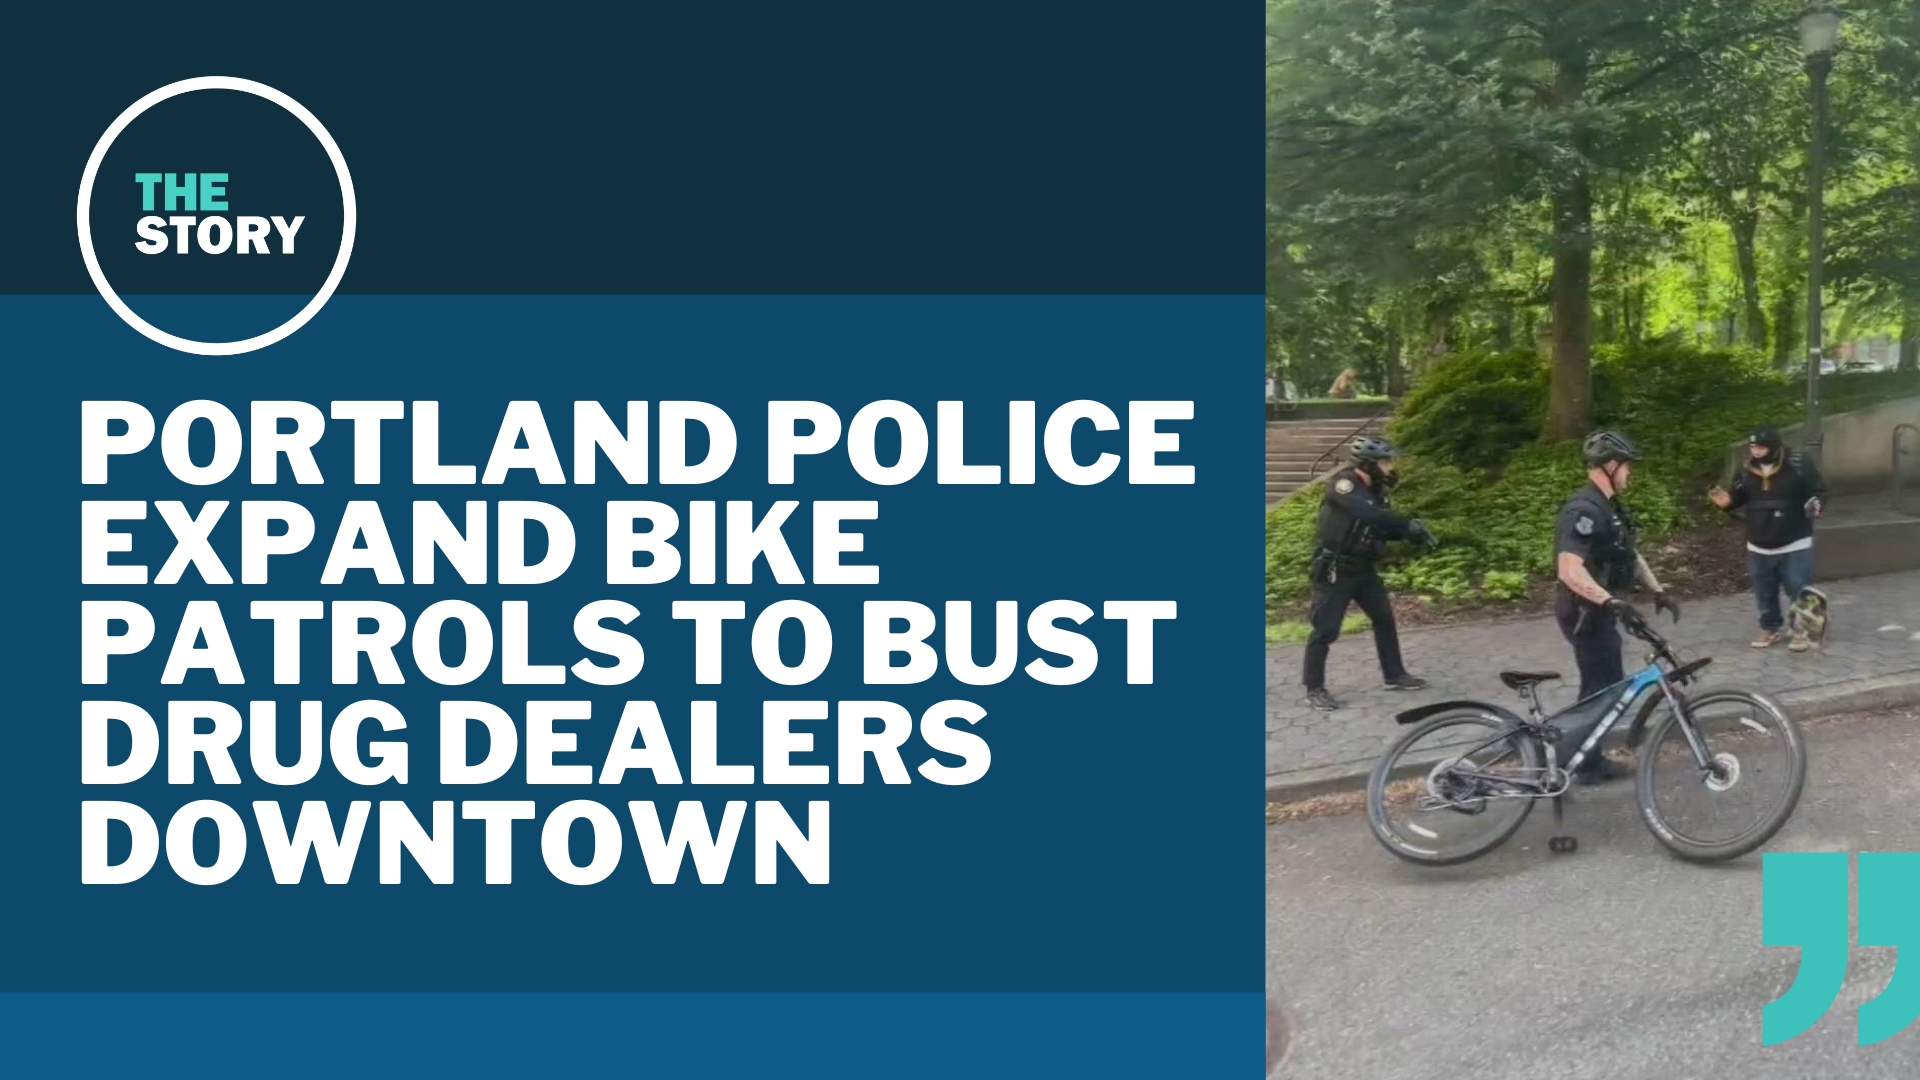 This effort targets drug dealers using an expanded bike squad, which now includes evenings and weekends.